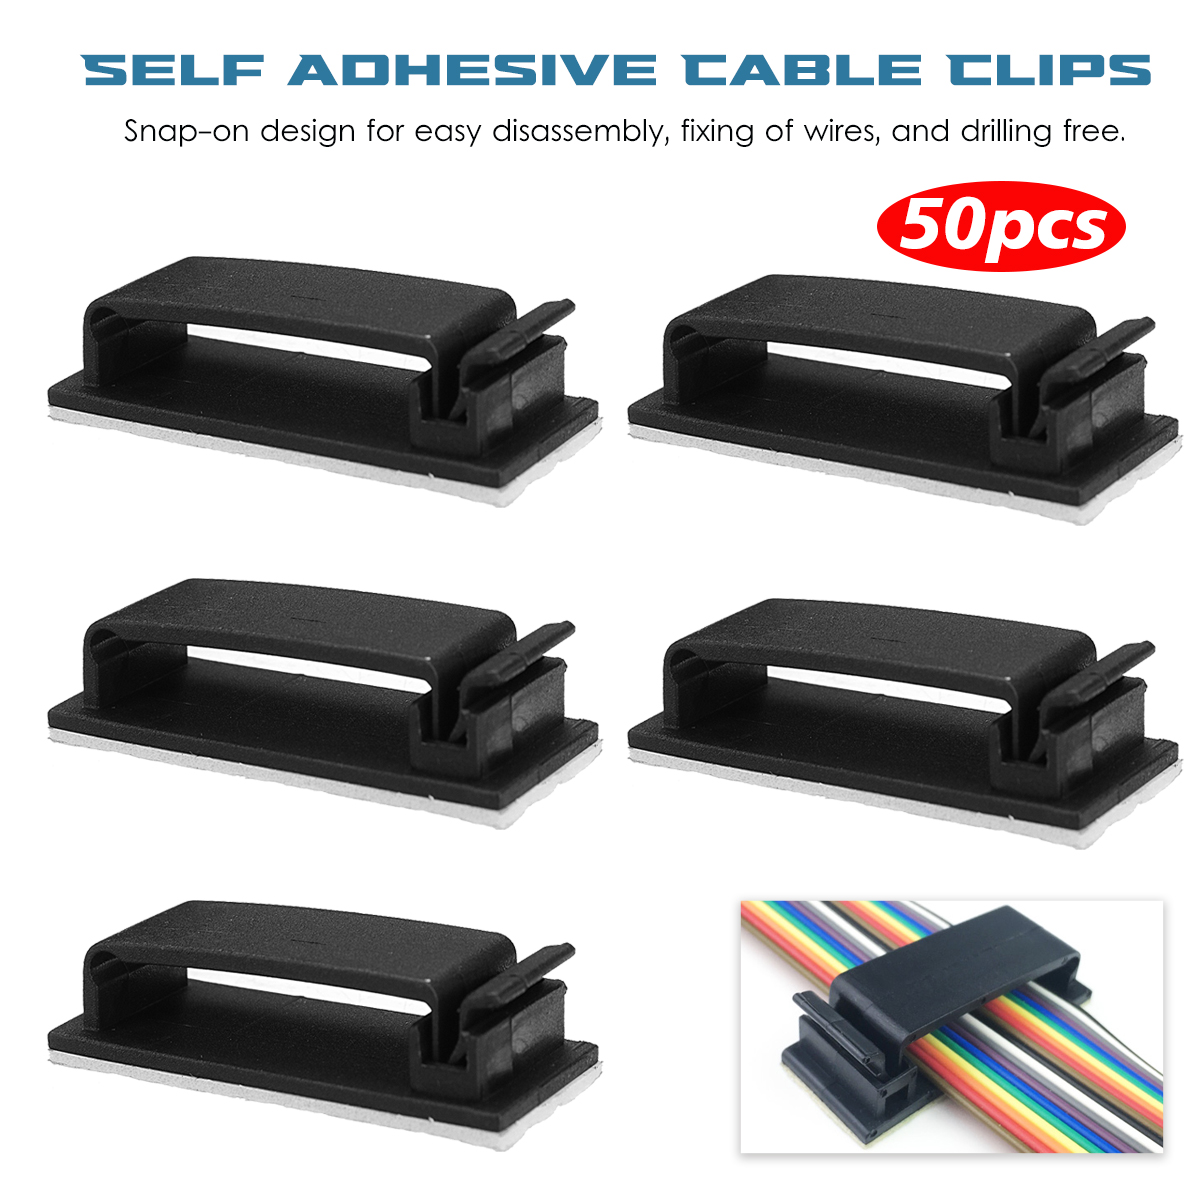 Find 50Pcs Cable Clips Self Adhesive Cord Management Wire Holder Organizer Clamp for Computer for Sale on Gipsybee.com with cryptocurrencies